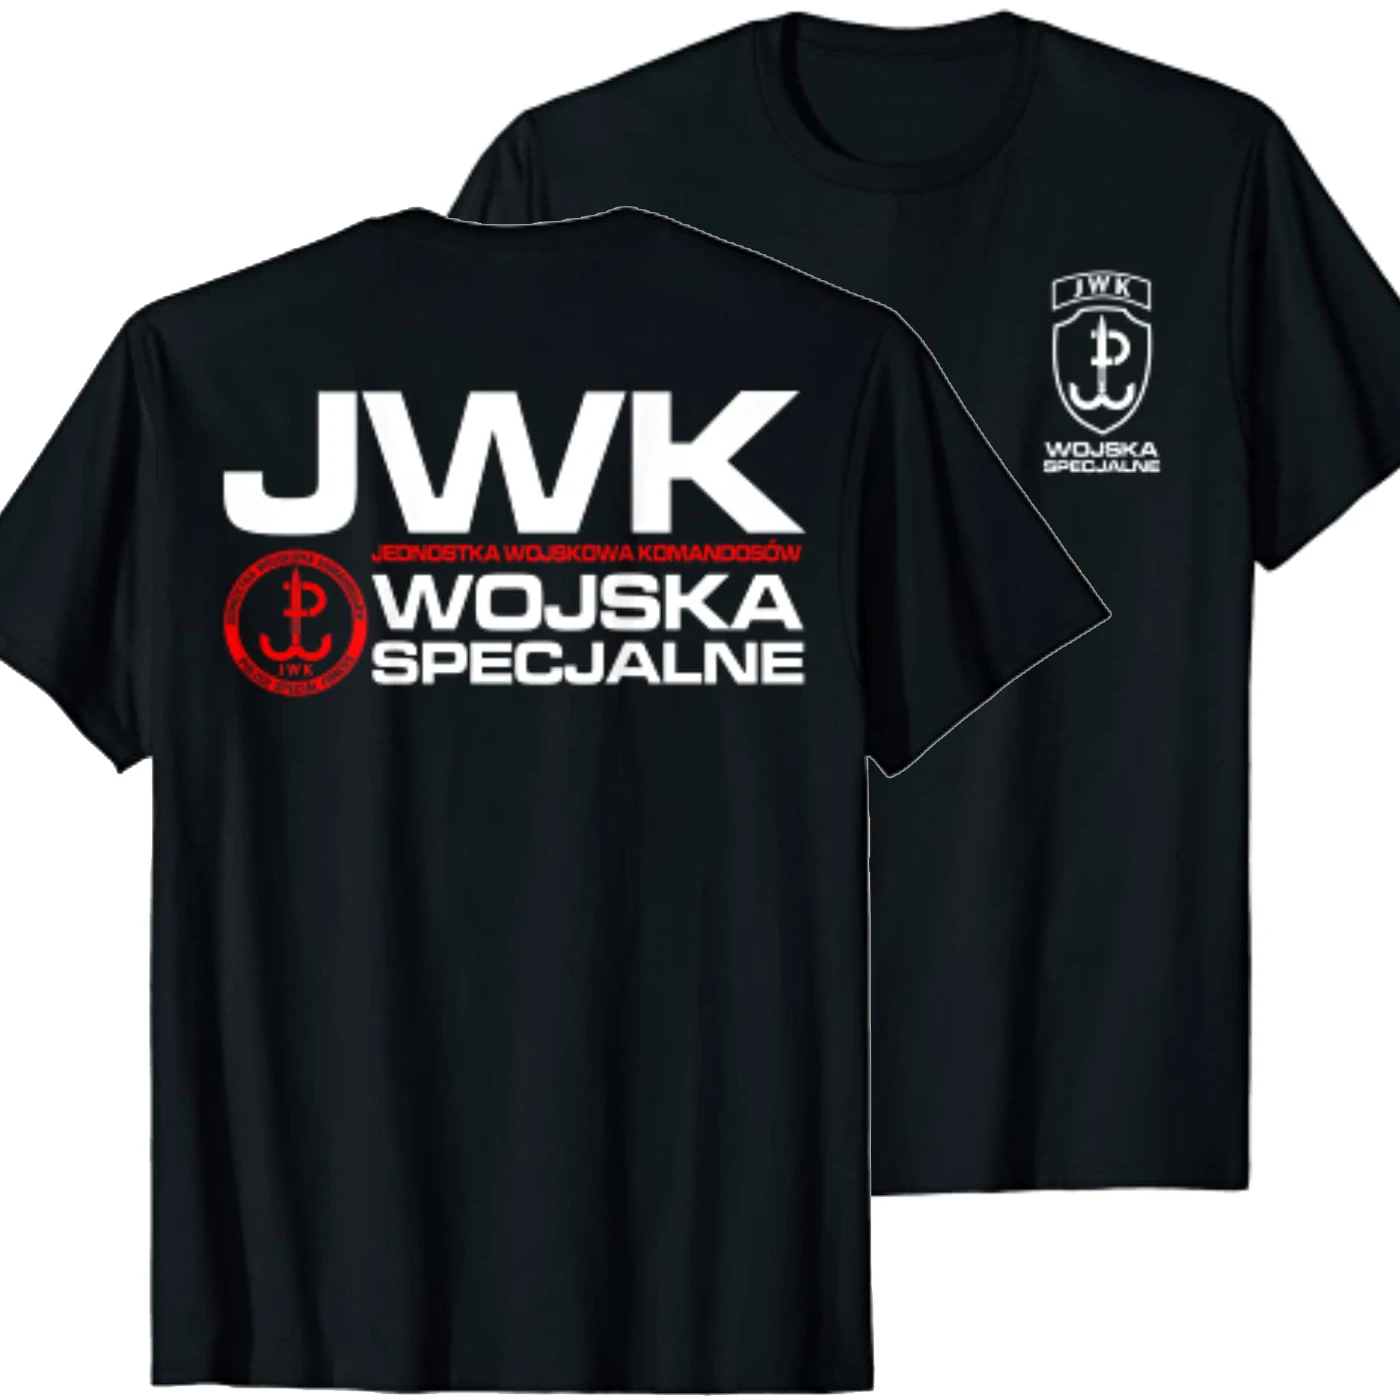 

Poland Polish Special Forces JWK T-Shirt 100% Cotton O-Neck Summer Short Sleeve Casual Mens T-shirt Size S-3XL